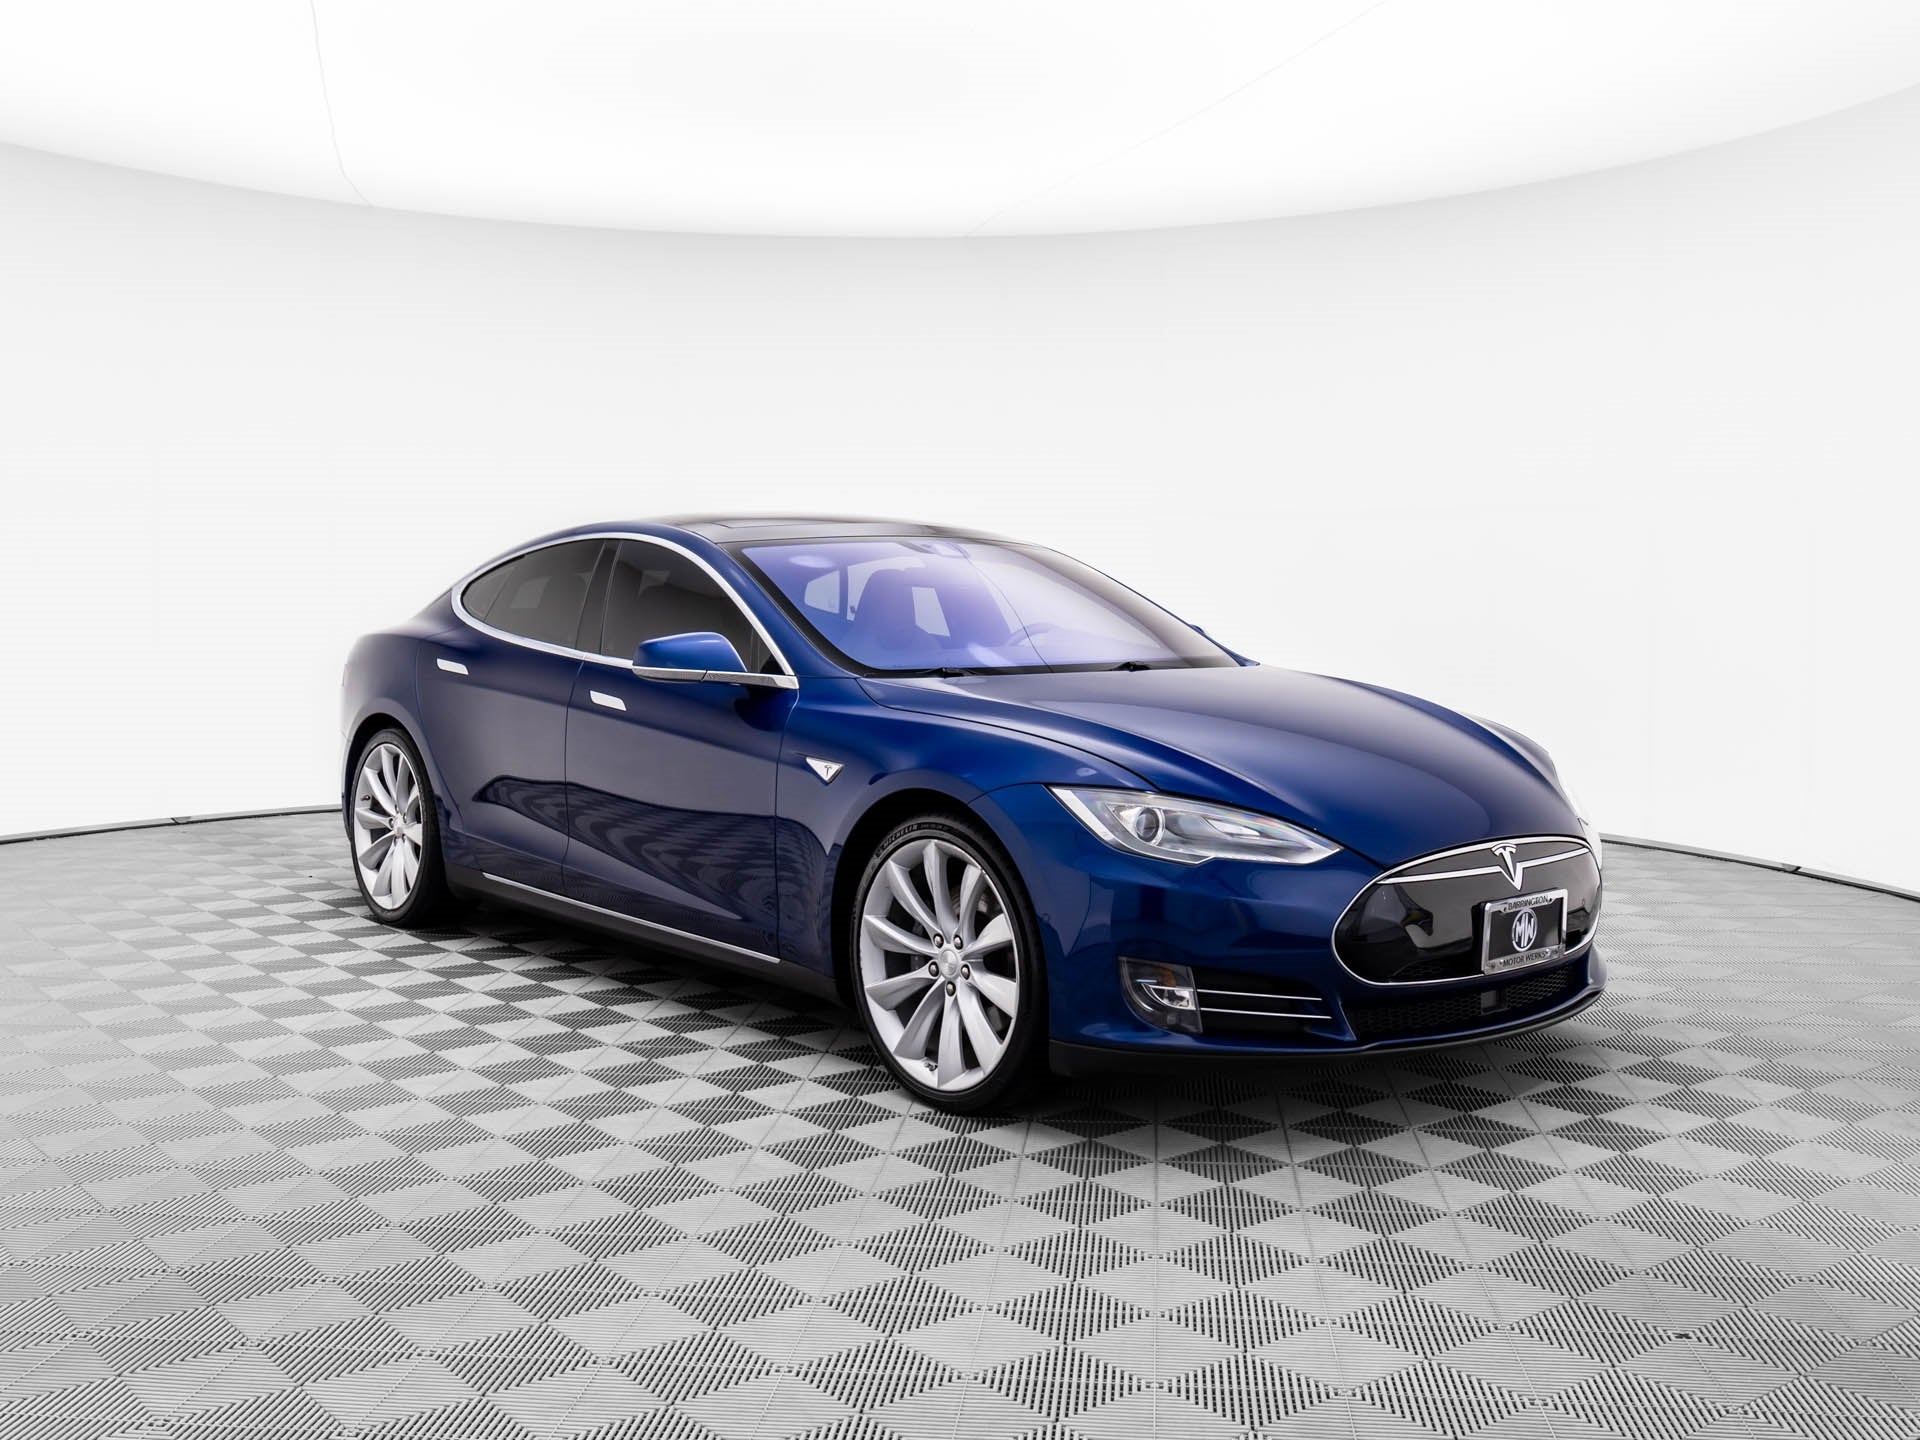 Used 2015 Tesla Model S 85D with VIN 5YJSA1E29FF119794 for sale in Barrington, IL